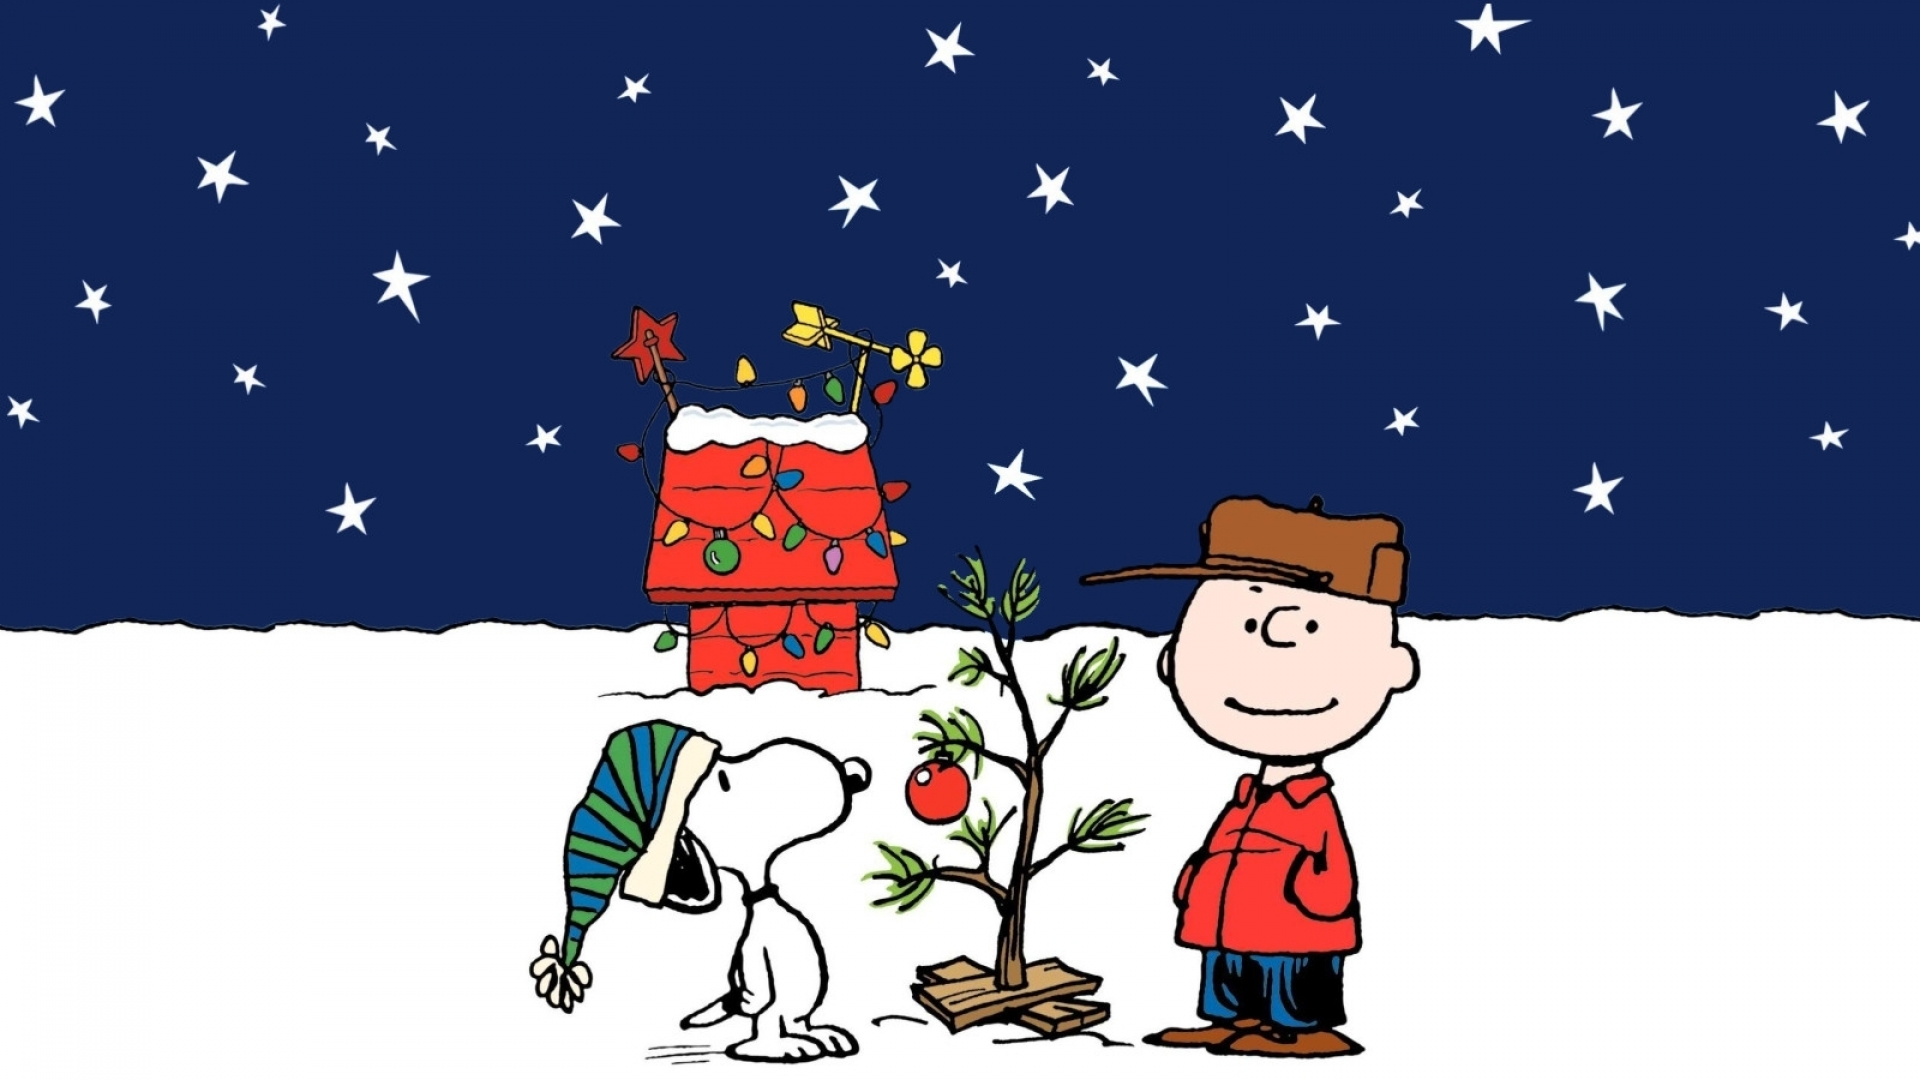 Charlie Brown Peanuts Ics Snoopy Christmas Gg Wallpaper Background